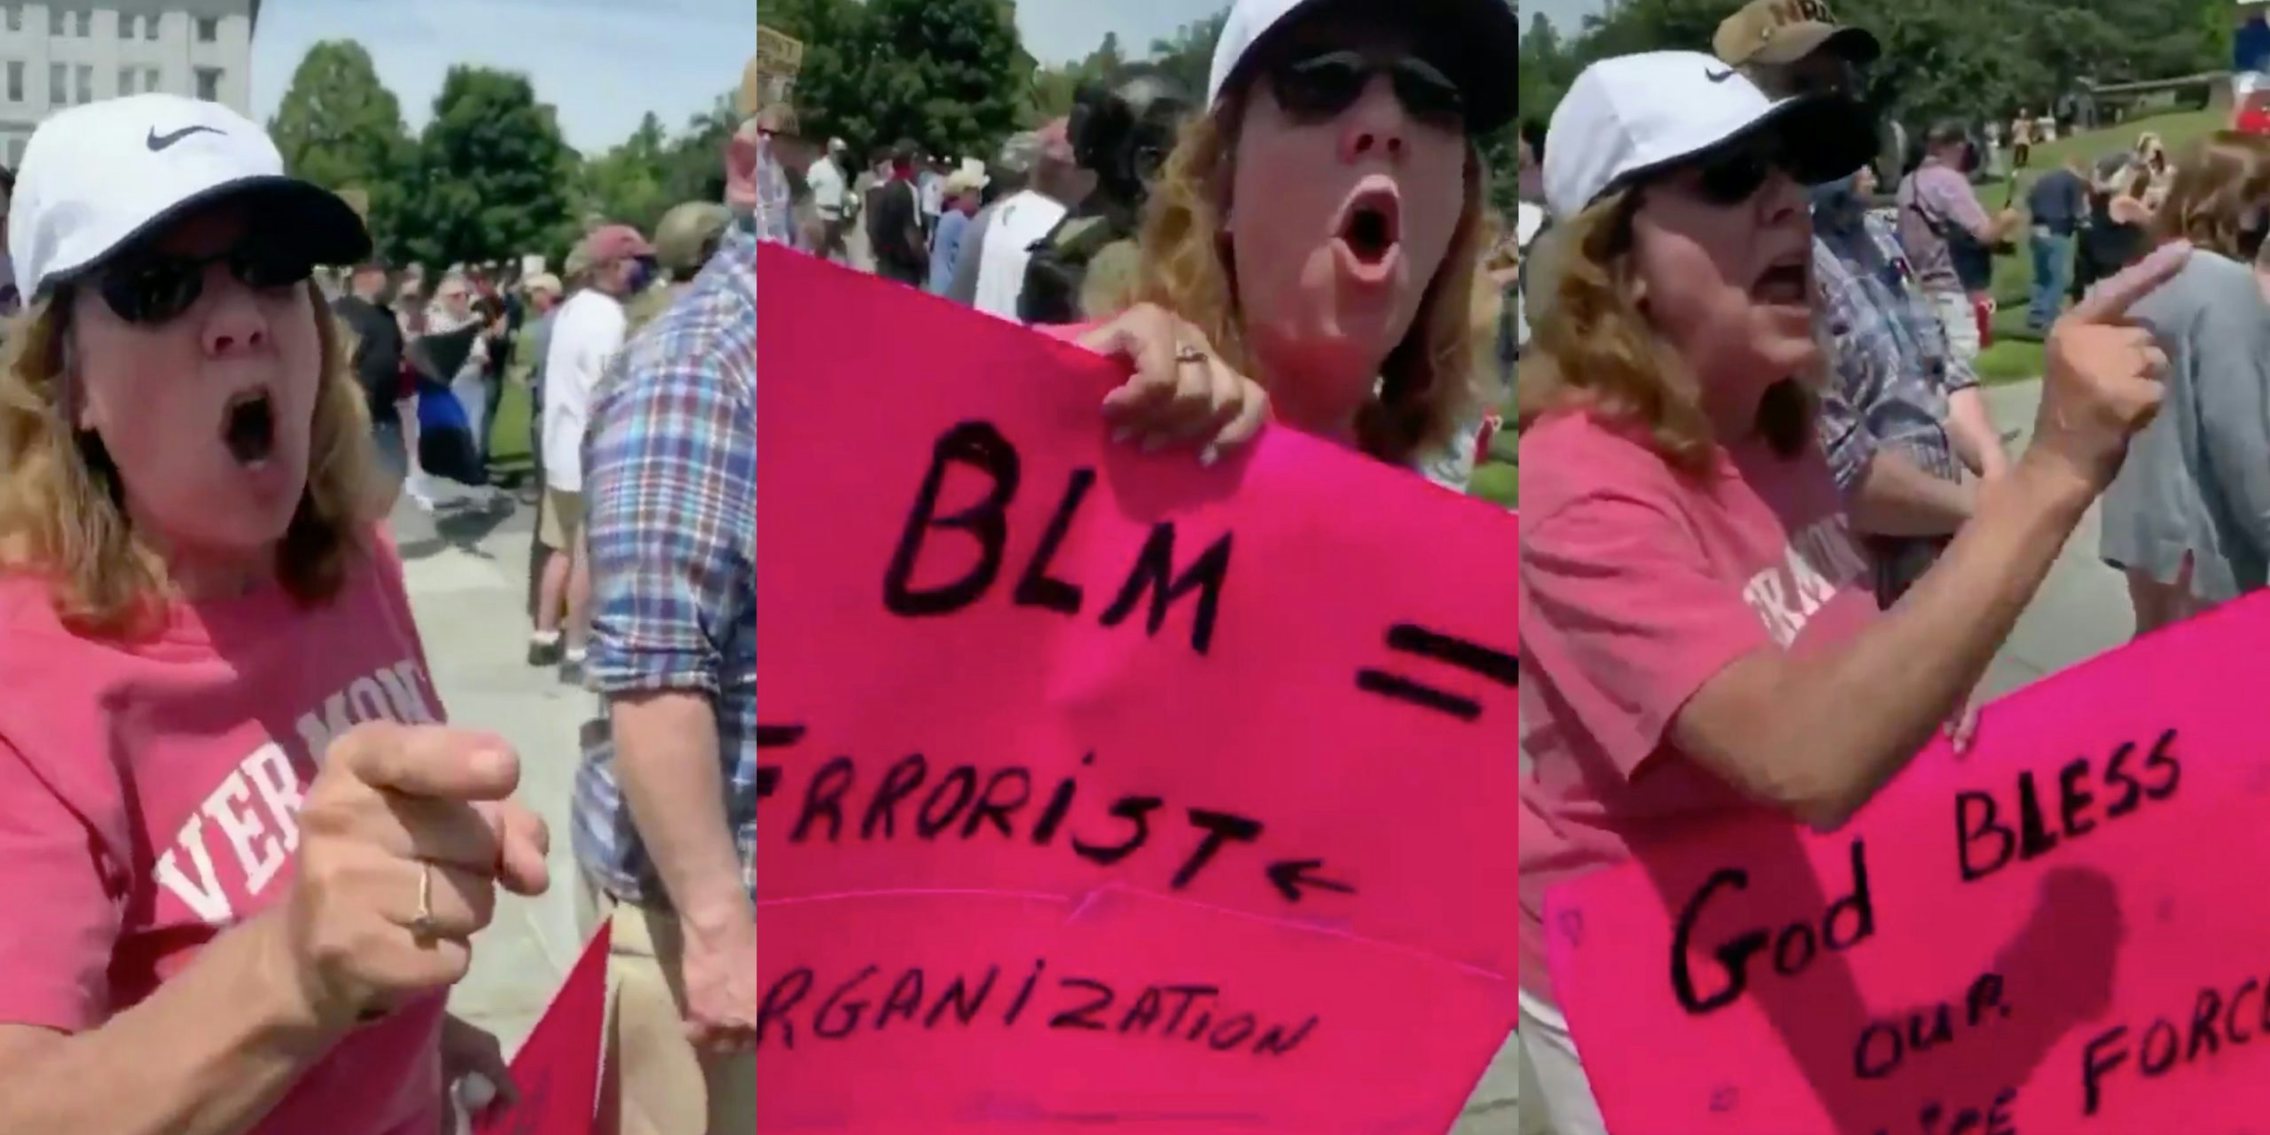 Screenshots show the woman who screamed 'Black lives don't matter' holding placards equating BLM to terrorism and expressing police support